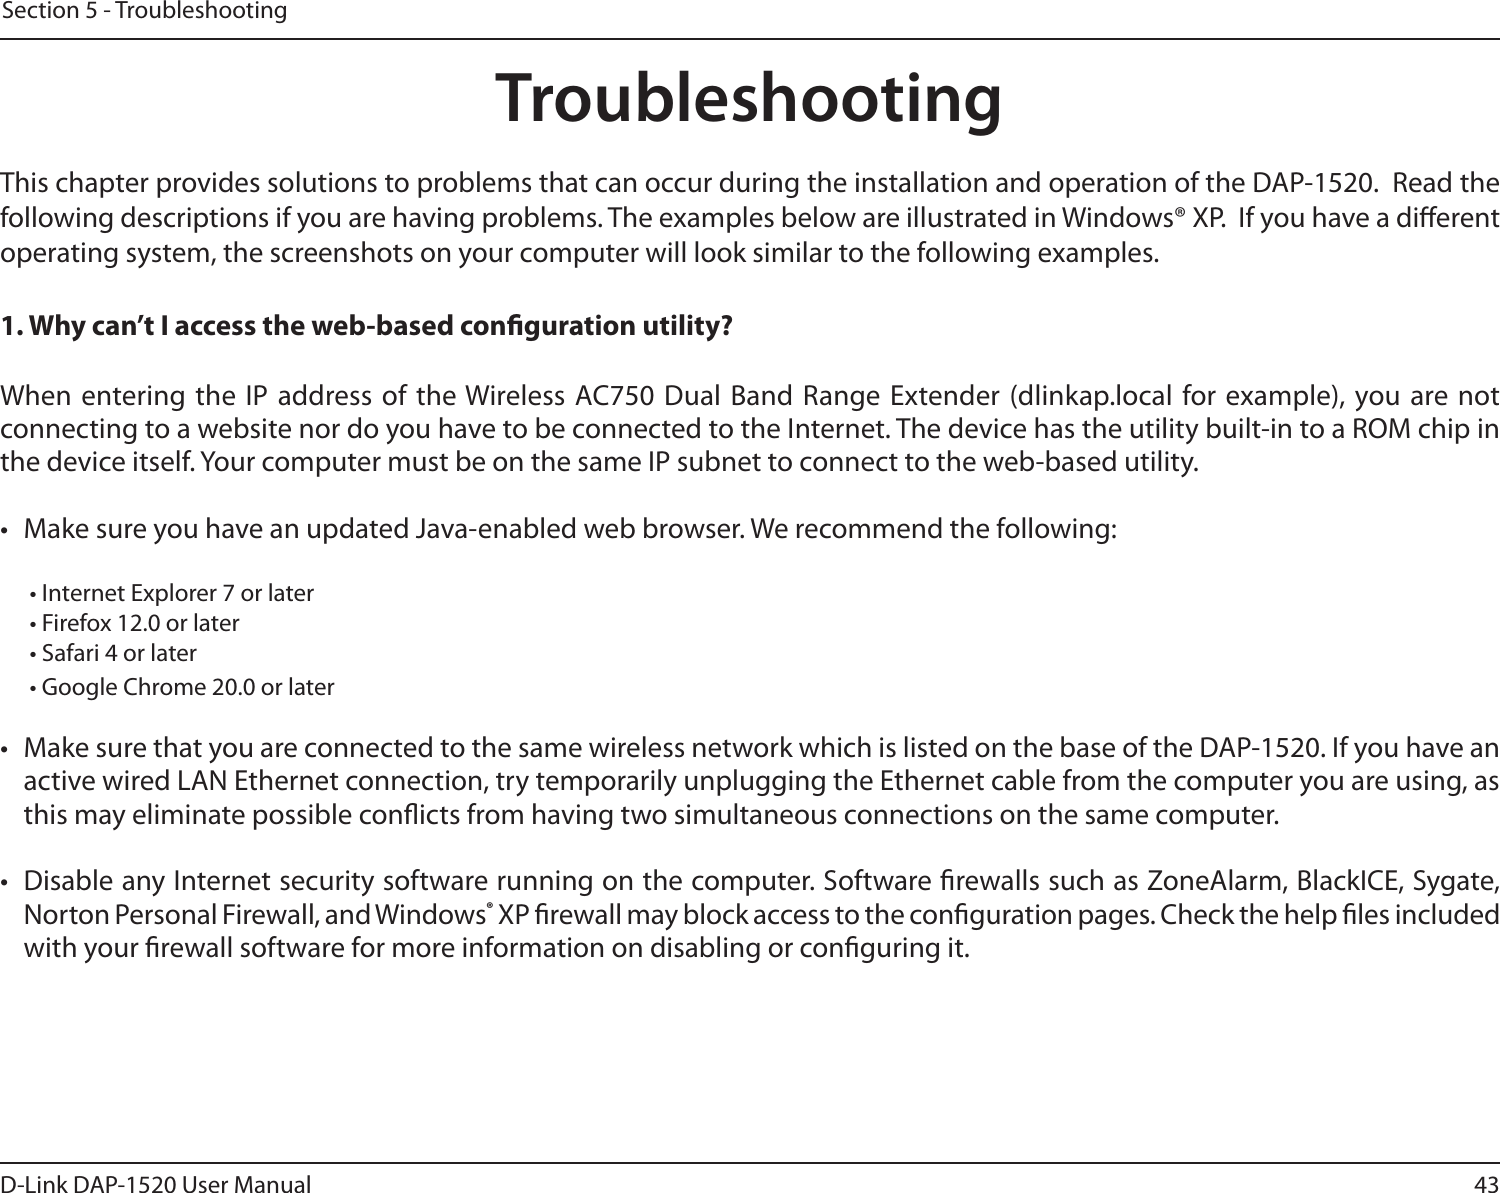 43D-Link DAP-1520 User ManualSection 5 - TroubleshootingTroubleshootingThis chapter provides solutions to problems that can occur during the installation and operation of the DAP-1520.  Read the following descriptions if you are having problems. The examples below are illustrated in Windows® XP.  If you have a dierent operating system, the screenshots on your computer will look similar to the following examples.1. Why can’t I access the web-based conguration utility?When entering the IP address of the Wireless AC750 Dual Band Range Extender (dlinkap.local for example), you are not connecting to a website nor do you have to be connected to the Internet. The device has the utility built-in to a ROM chip in the device itself. Your computer must be on the same IP subnet to connect to the web-based utility. •  Make sure you have an updated Java-enabled web browser. We recommend the following:  • Internet Explorer 7 or later• Firefox 12.0 or later• Safari 4 or later• Google Chrome 20.0 or later•  Make sure that you are connected to the same wireless network which is listed on the base of the DAP-1520. If you have an active wired LAN Ethernet connection, try temporarily unplugging the Ethernet cable from the computer you are using, as this may eliminate possible conicts from having two simultaneous connections on the same computer. •  Disable any Internet security software running on the computer. Software rewalls such as ZoneAlarm, BlackICE, Sygate, Norton Personal Firewall, and Windows® XP rewall may block access to the conguration pages. Check the help les included with your rewall software for more information on disabling or conguring it.